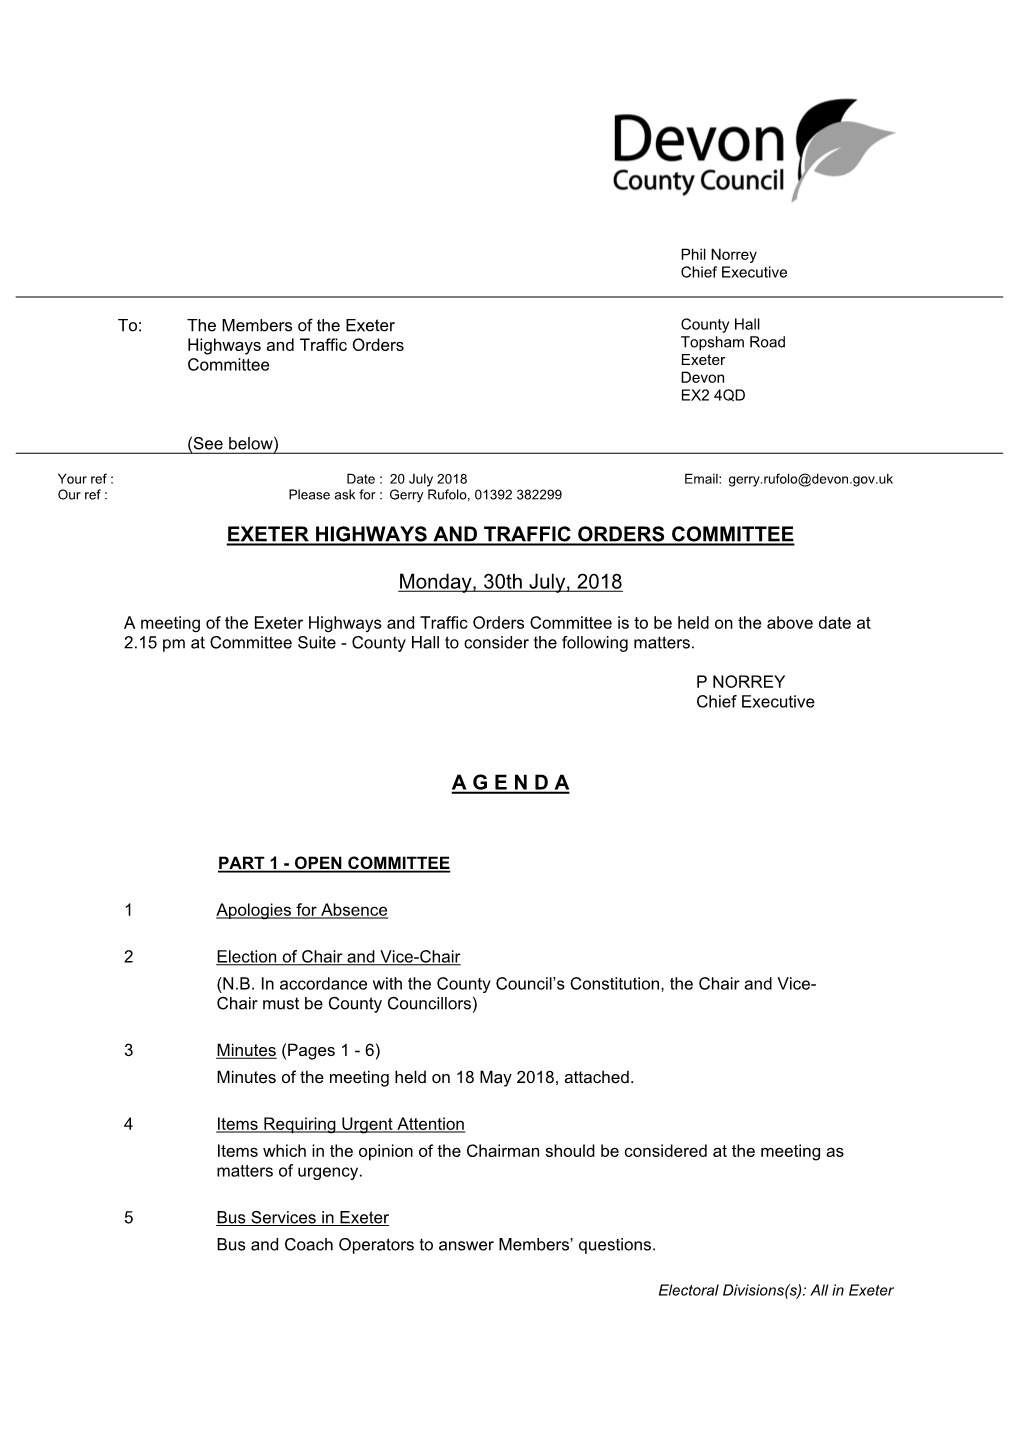 (Public Pack)Agenda Document for Exeter Highways and Traffic Orders